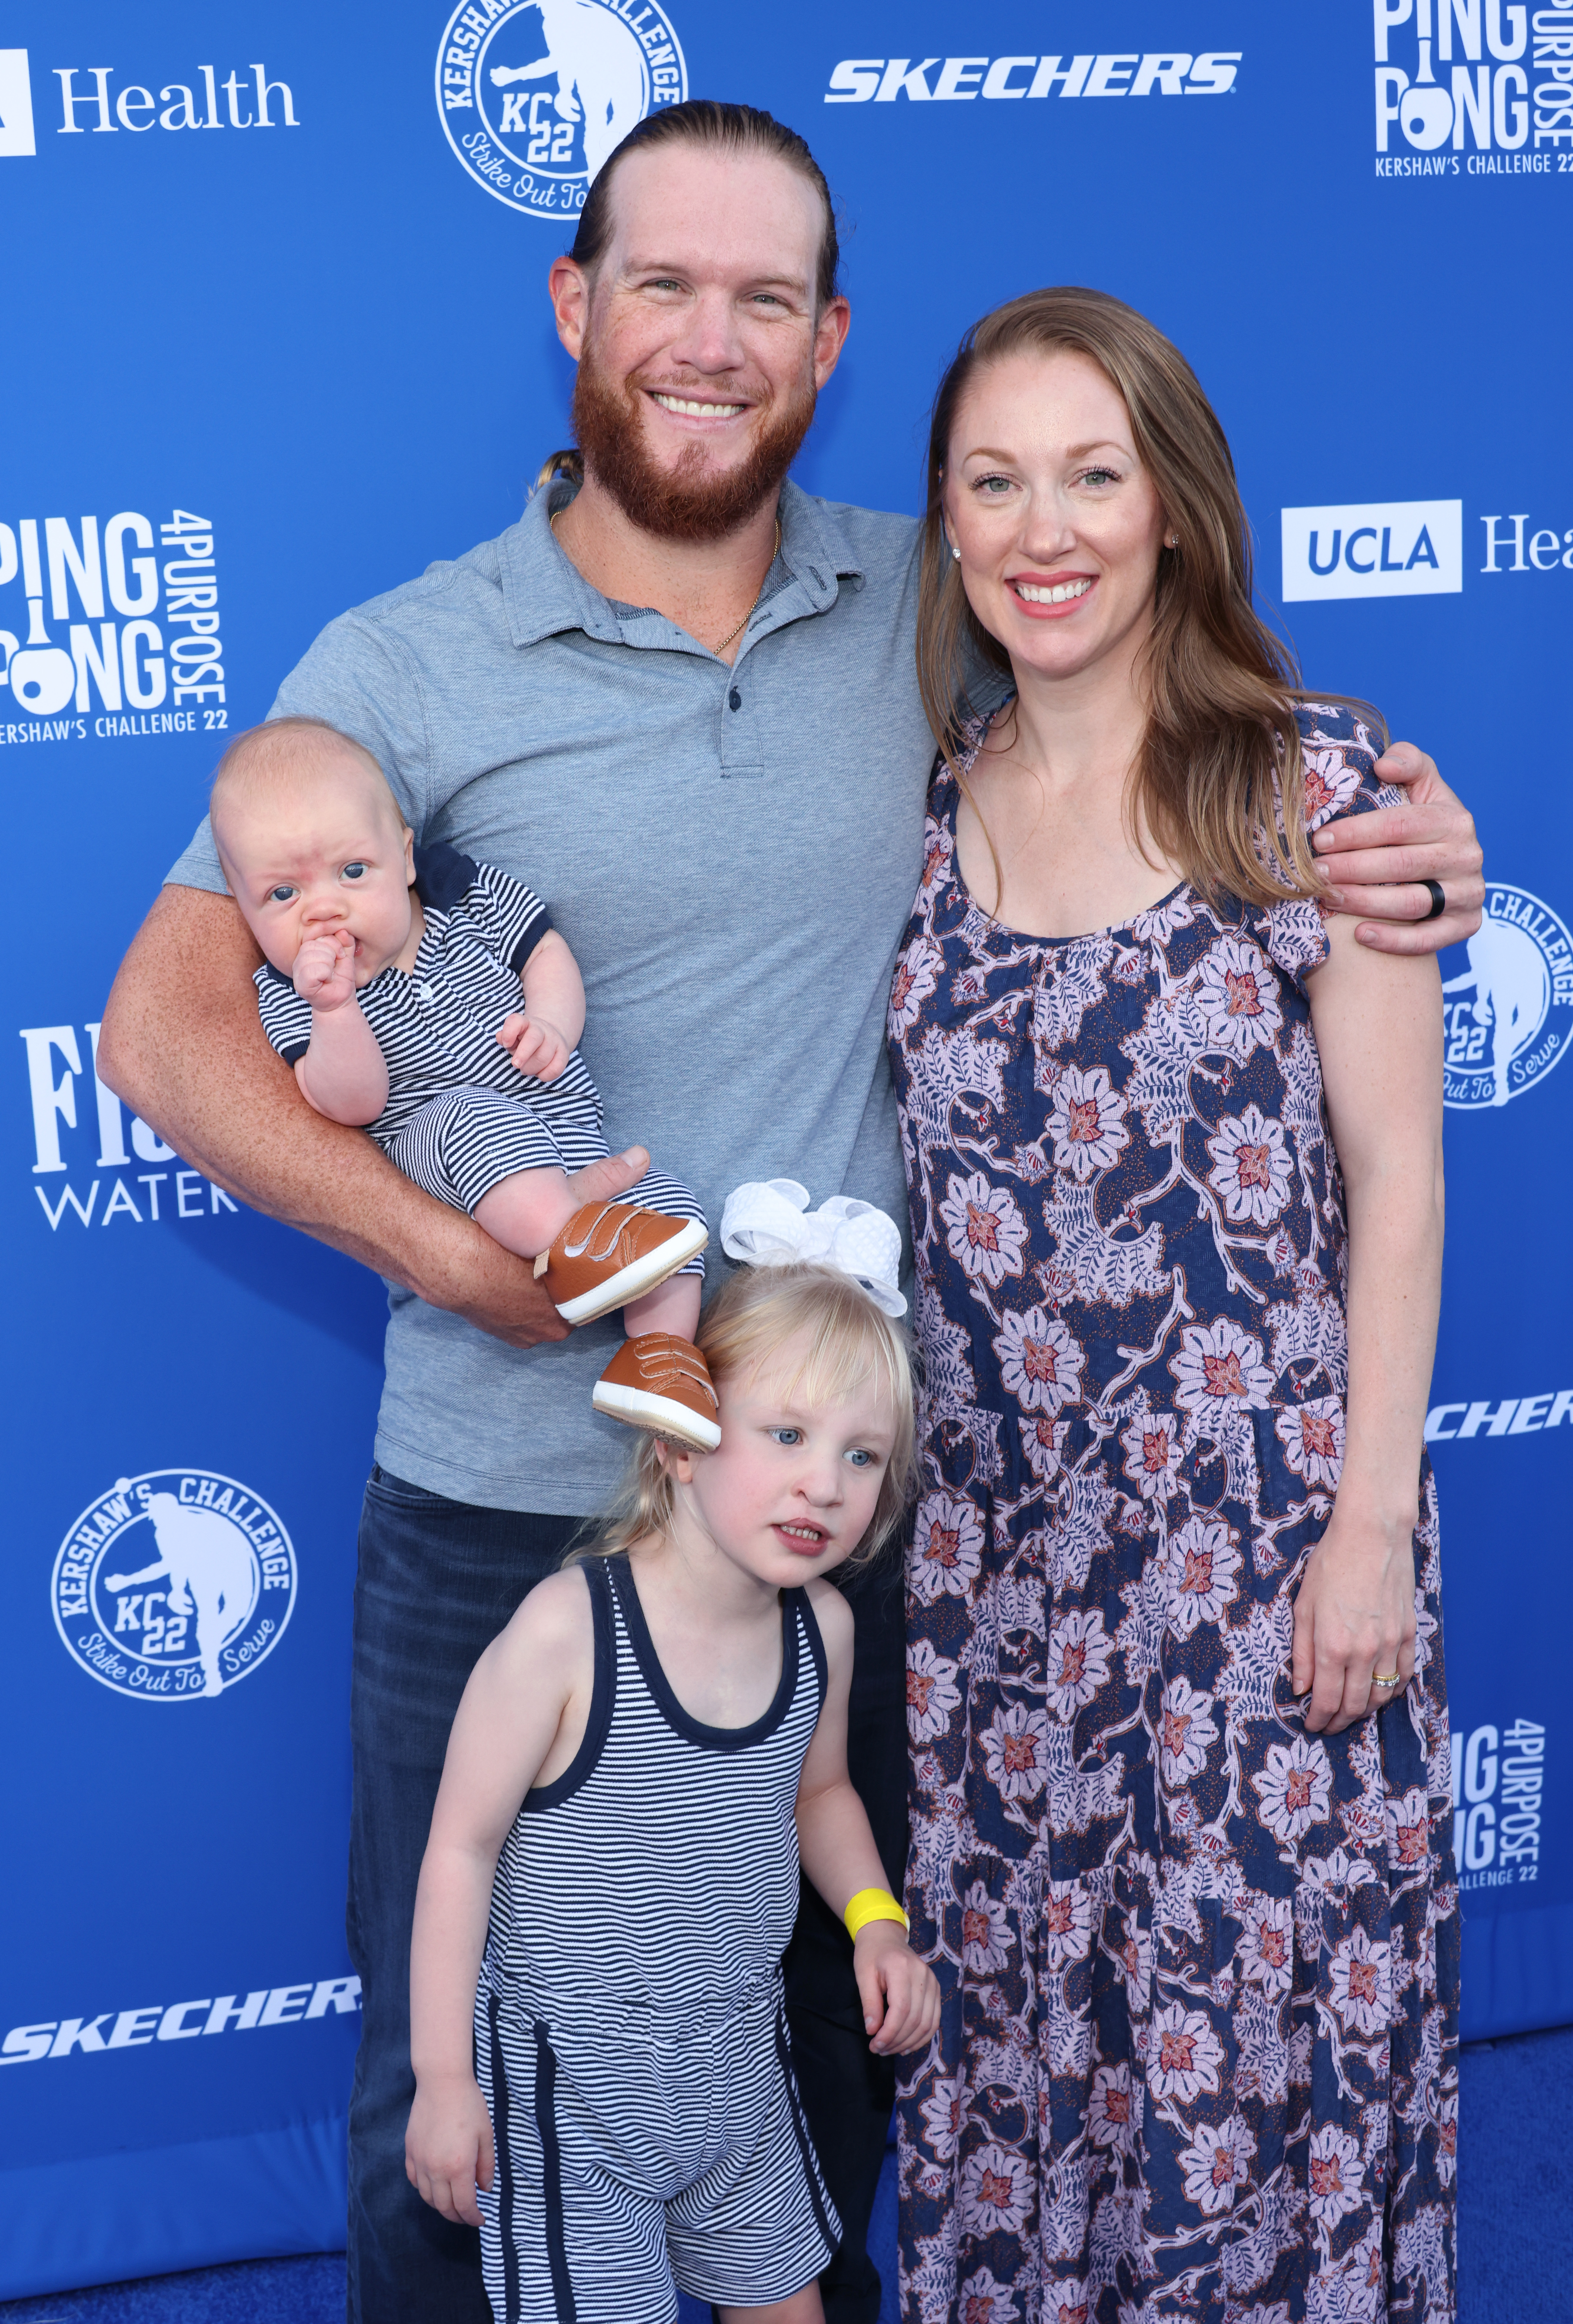 Ashley Holt Kimbrel Is Craig Kimbrel's Wife & Mom to His 2 Children